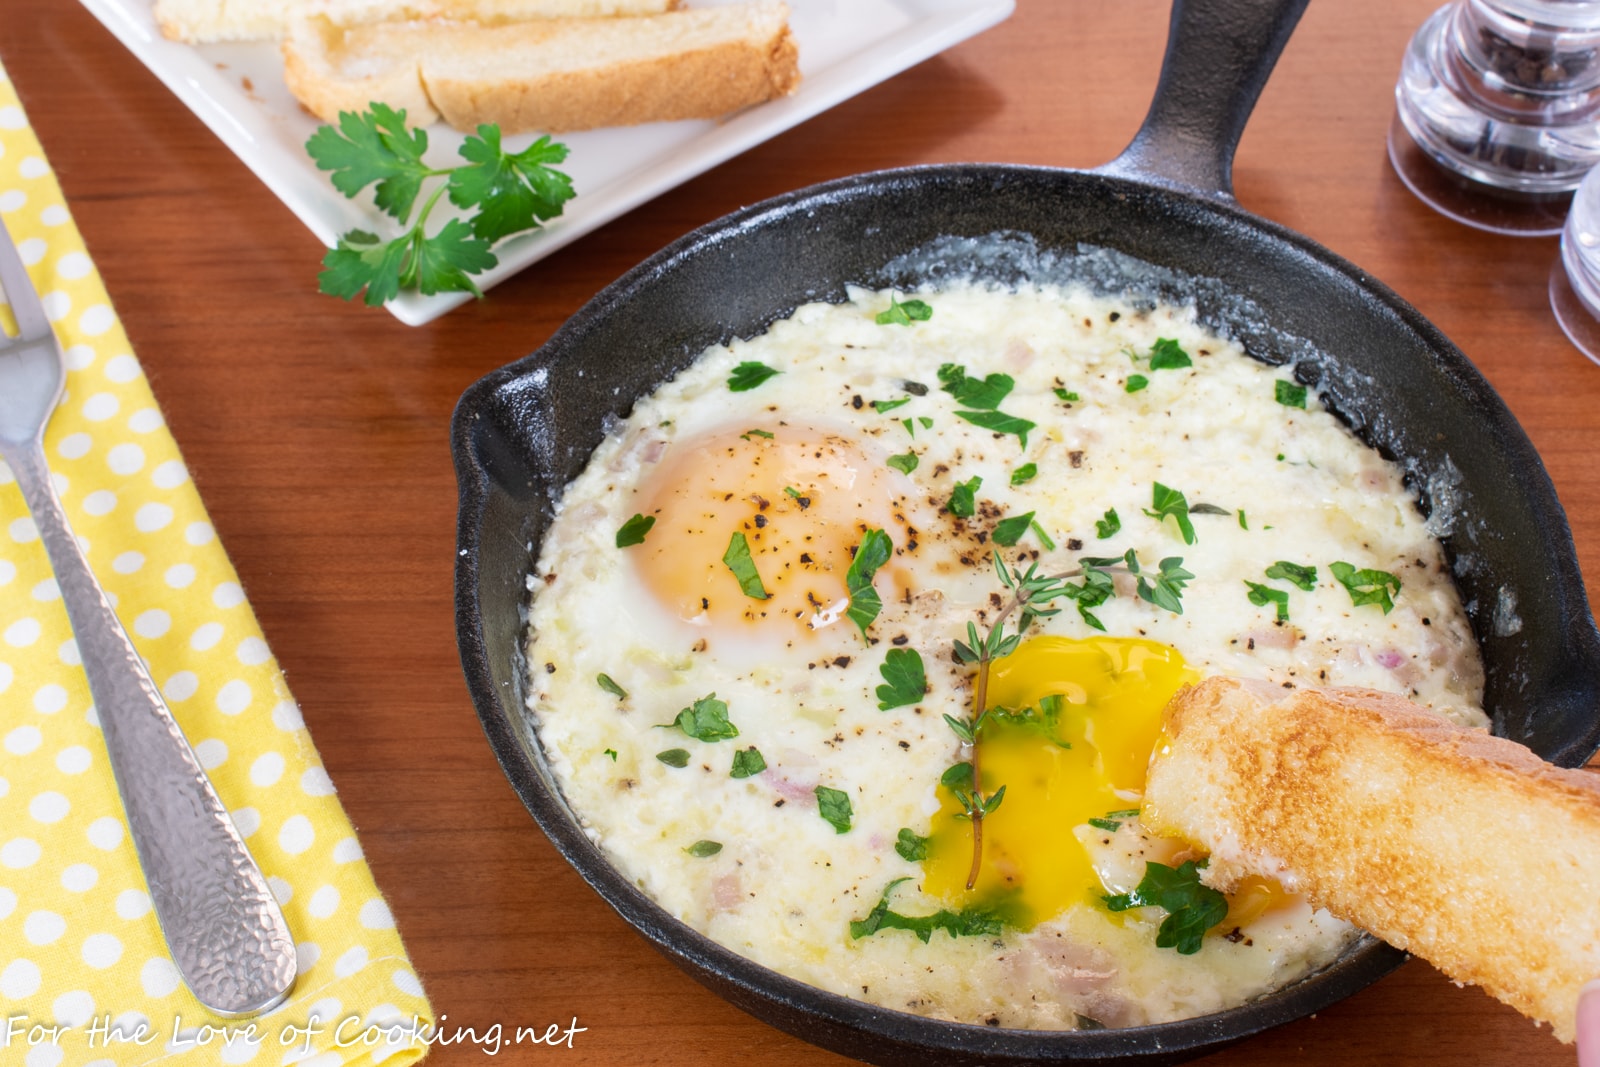 https://fortheloveofcooking-net.exactdn.com/wp-content/uploads/2019/02/Skillet-Baked-Eggs-with-Cream-and-Parmesan-5339-2.jpg?strip=all&lossy=1&quality=90&w=2560&ssl=1